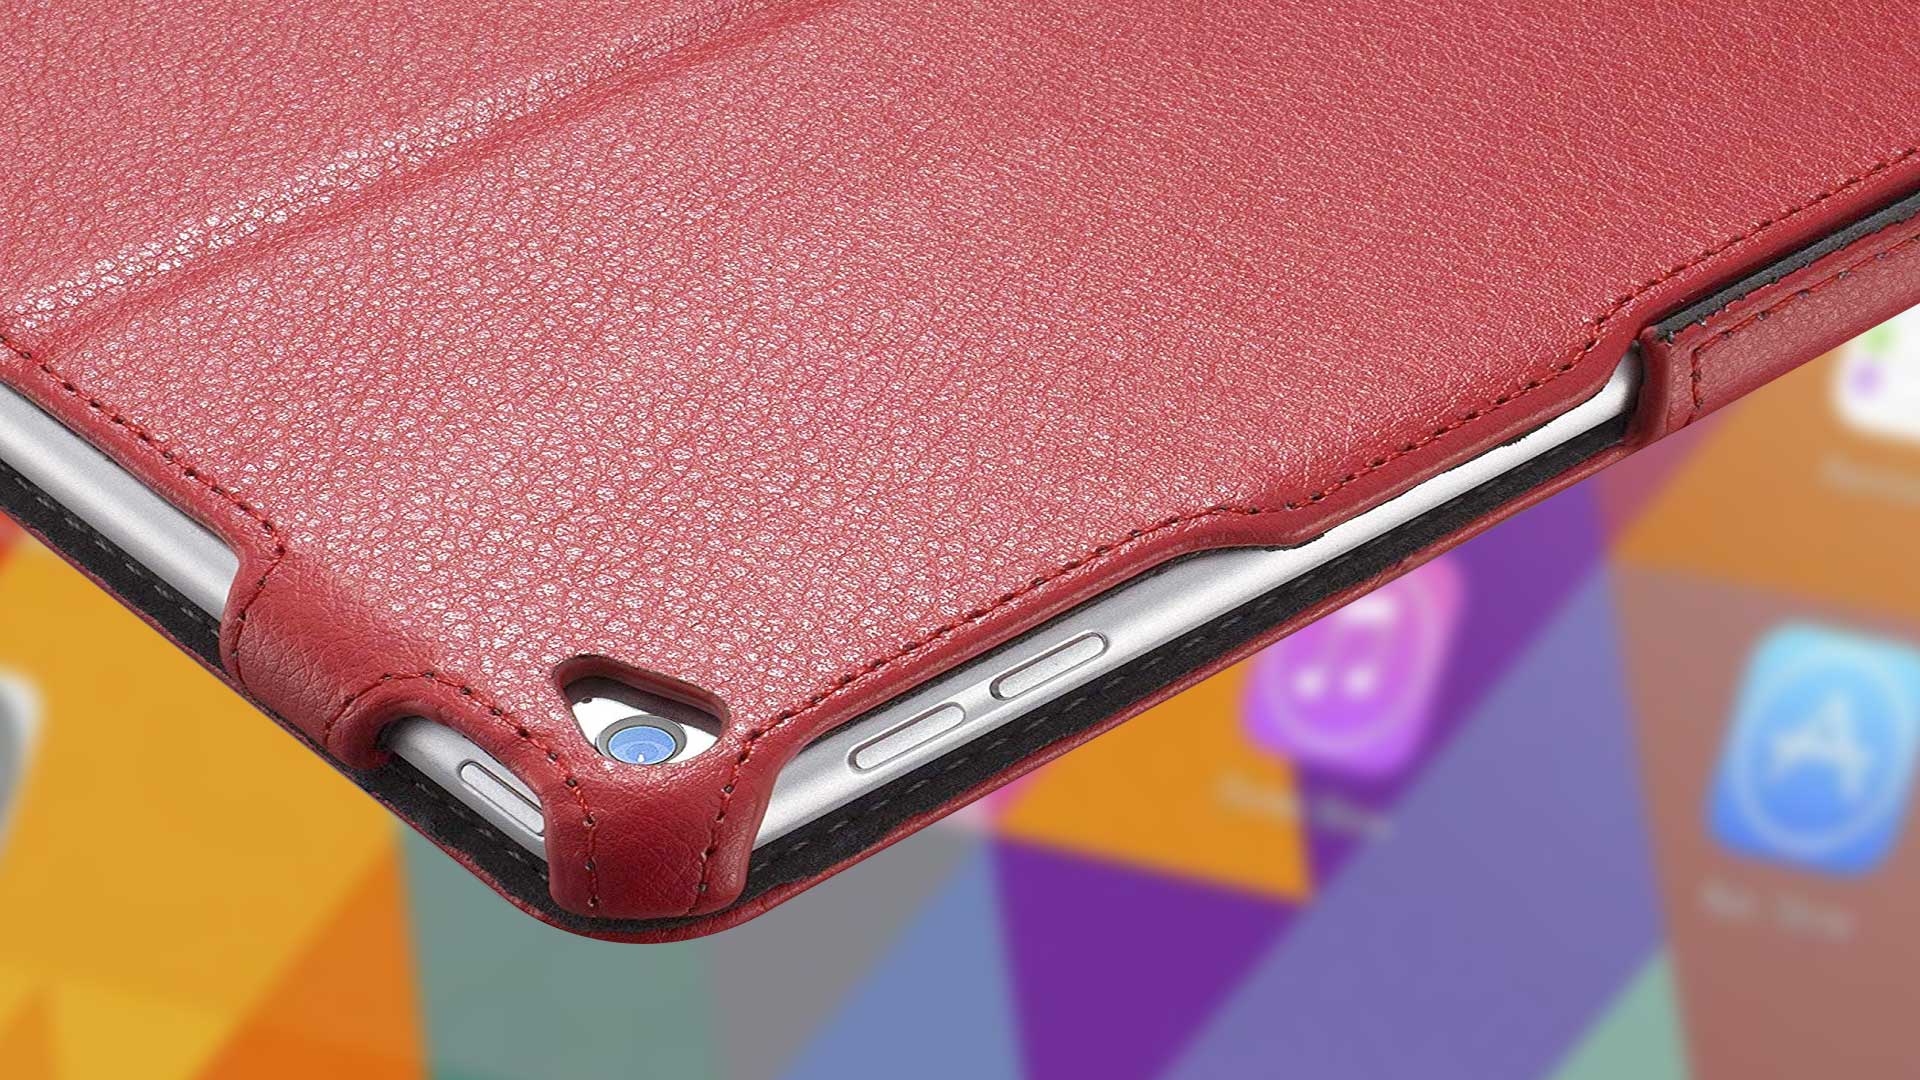 Best cases for ipad air 2